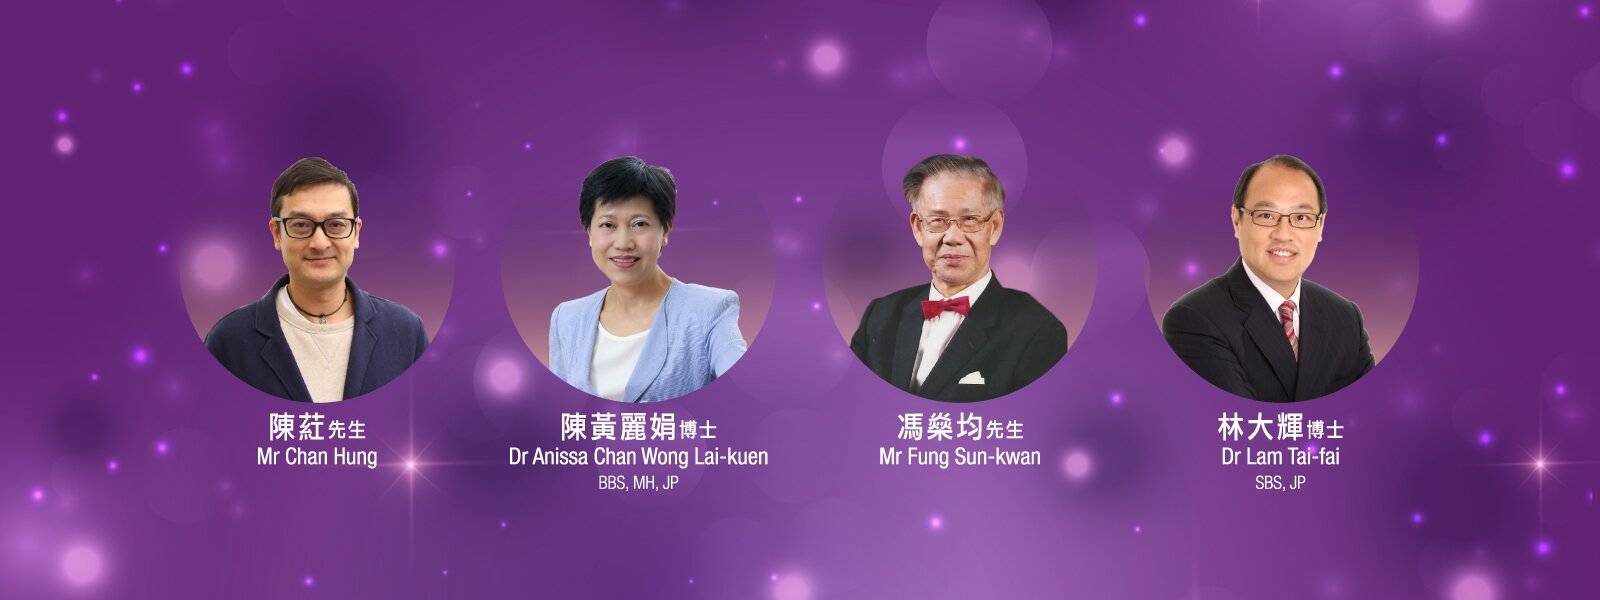 EdUHK to Present Honorary Fellowships to Four Distinguished Individuals